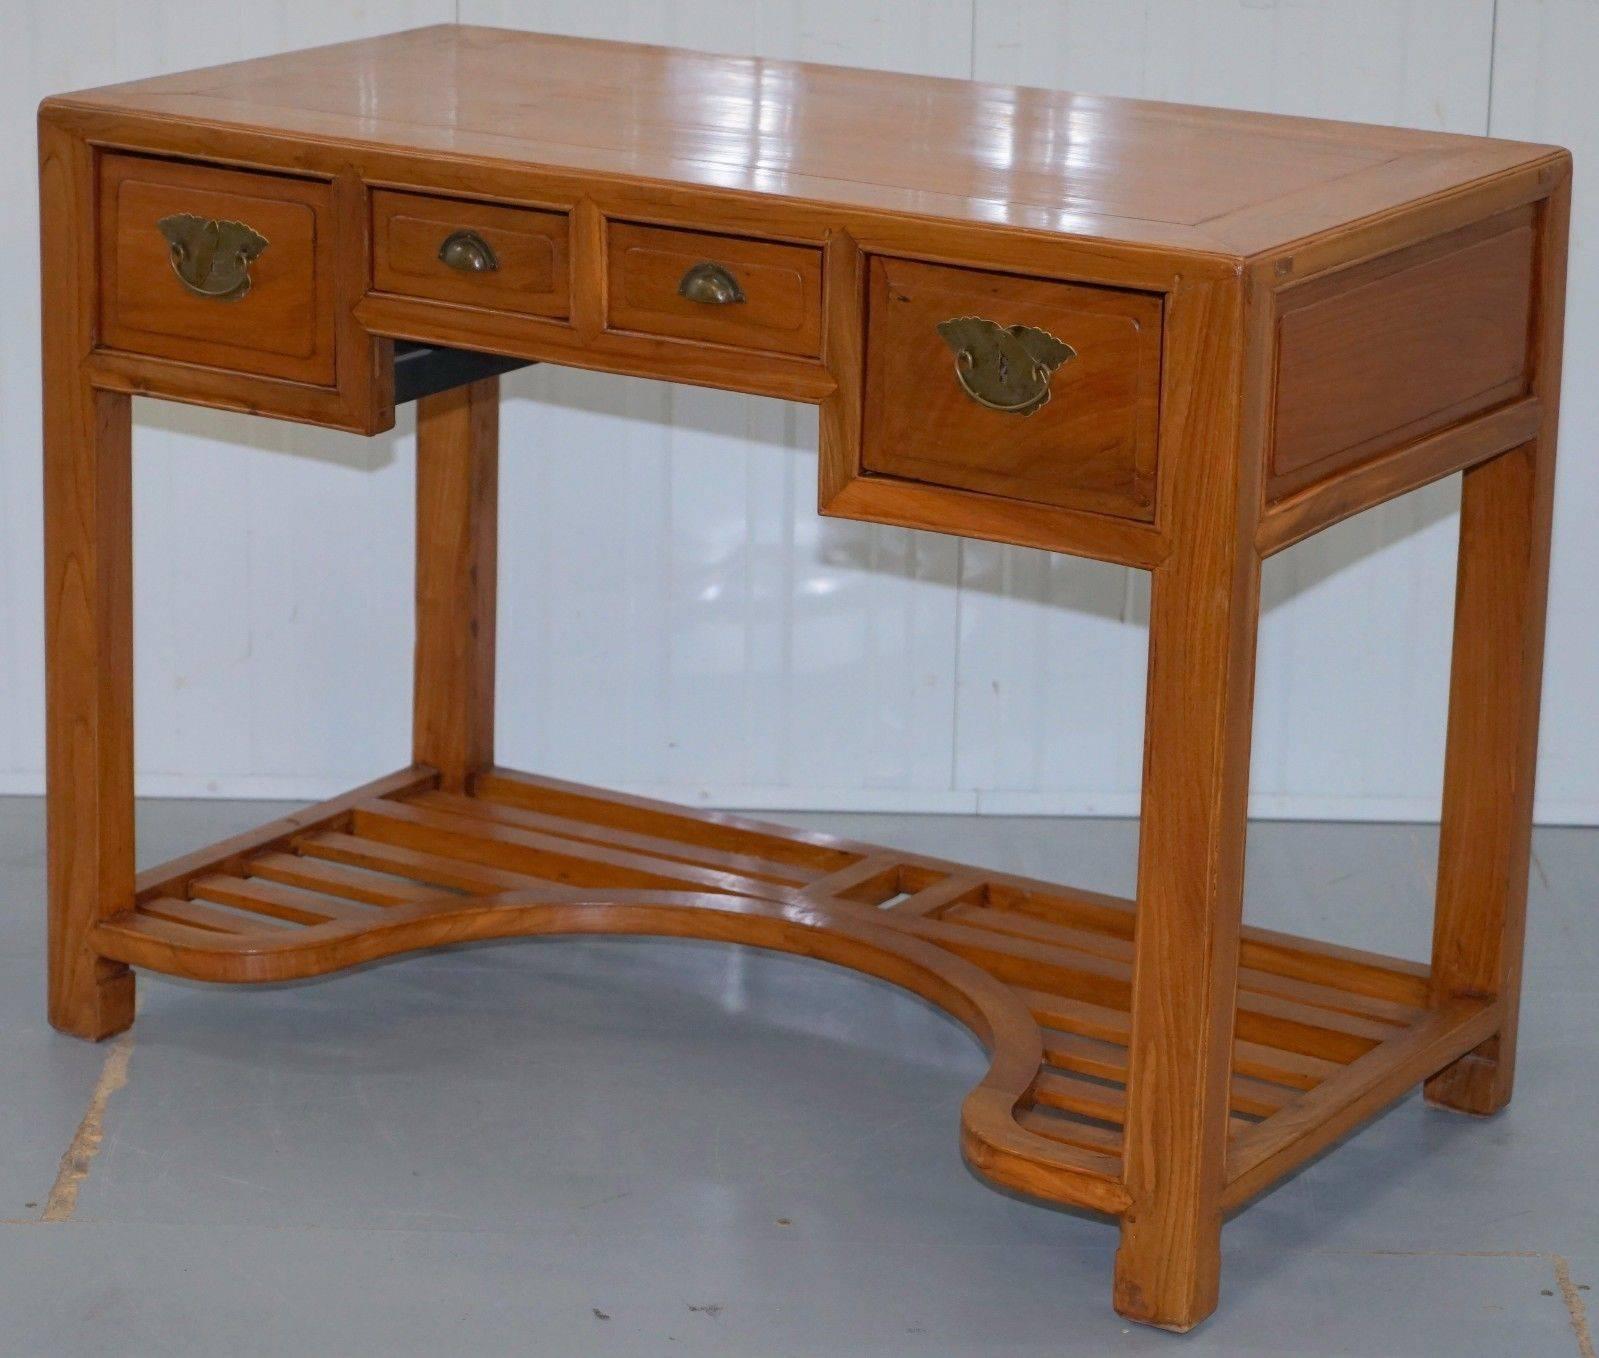 Hand-Carved Vintage Chinese Ming Style Teak Desk and Matching Chair Lovely Rare Pair Office